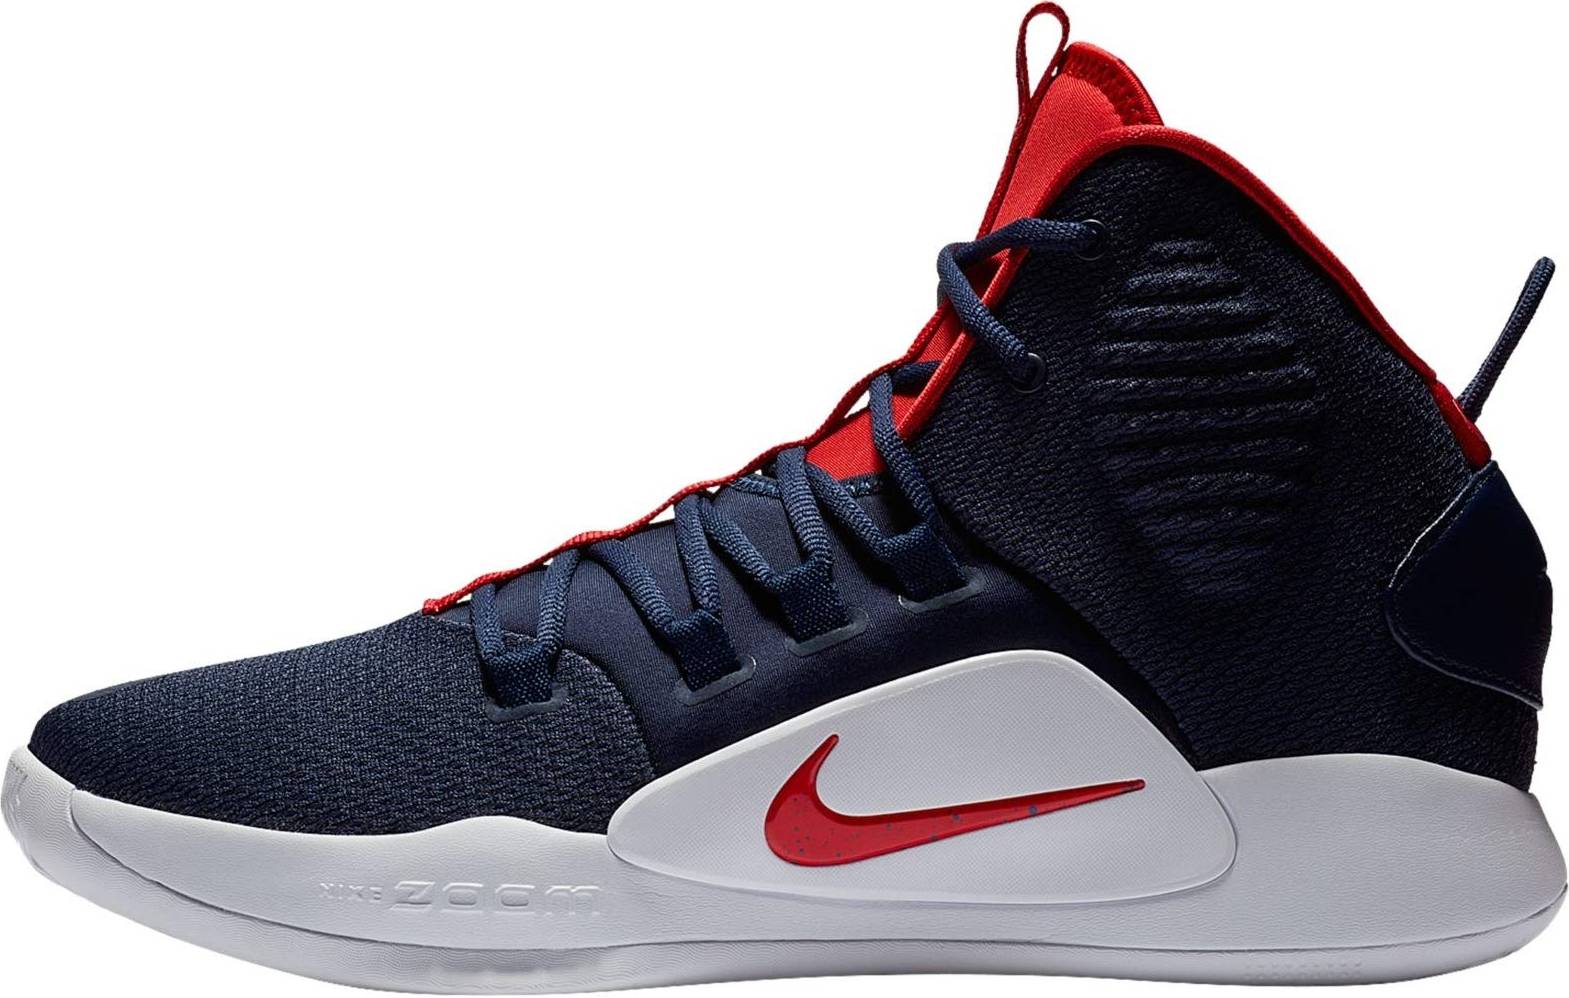 Only $108 + Review of Nike Hyperdunk X 